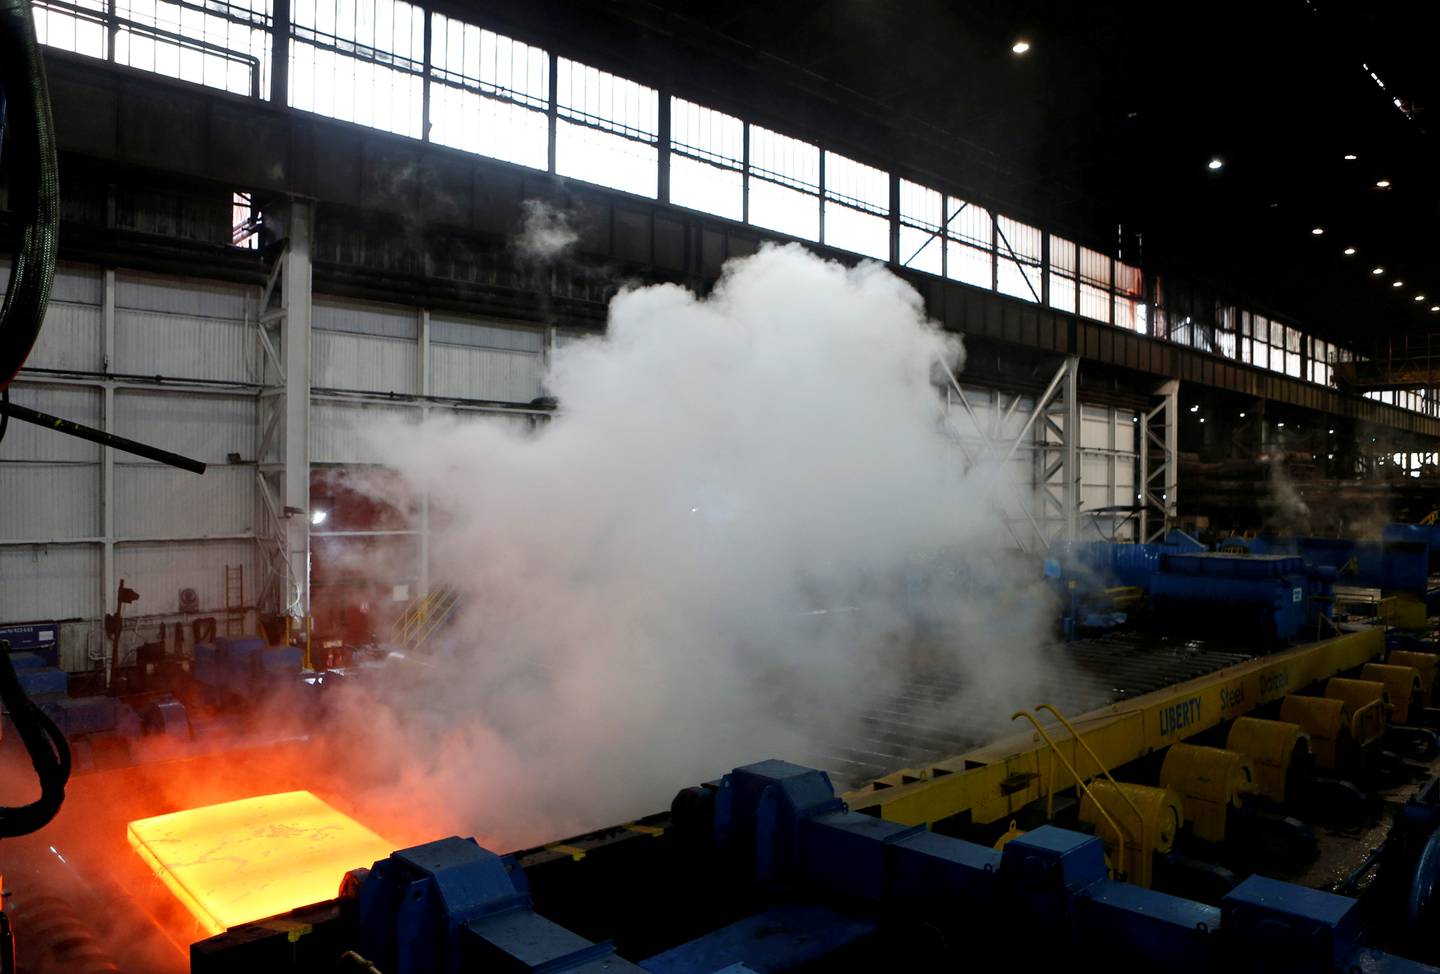 Liberty Steel furnaces are firing up again – but for how long? Reuters